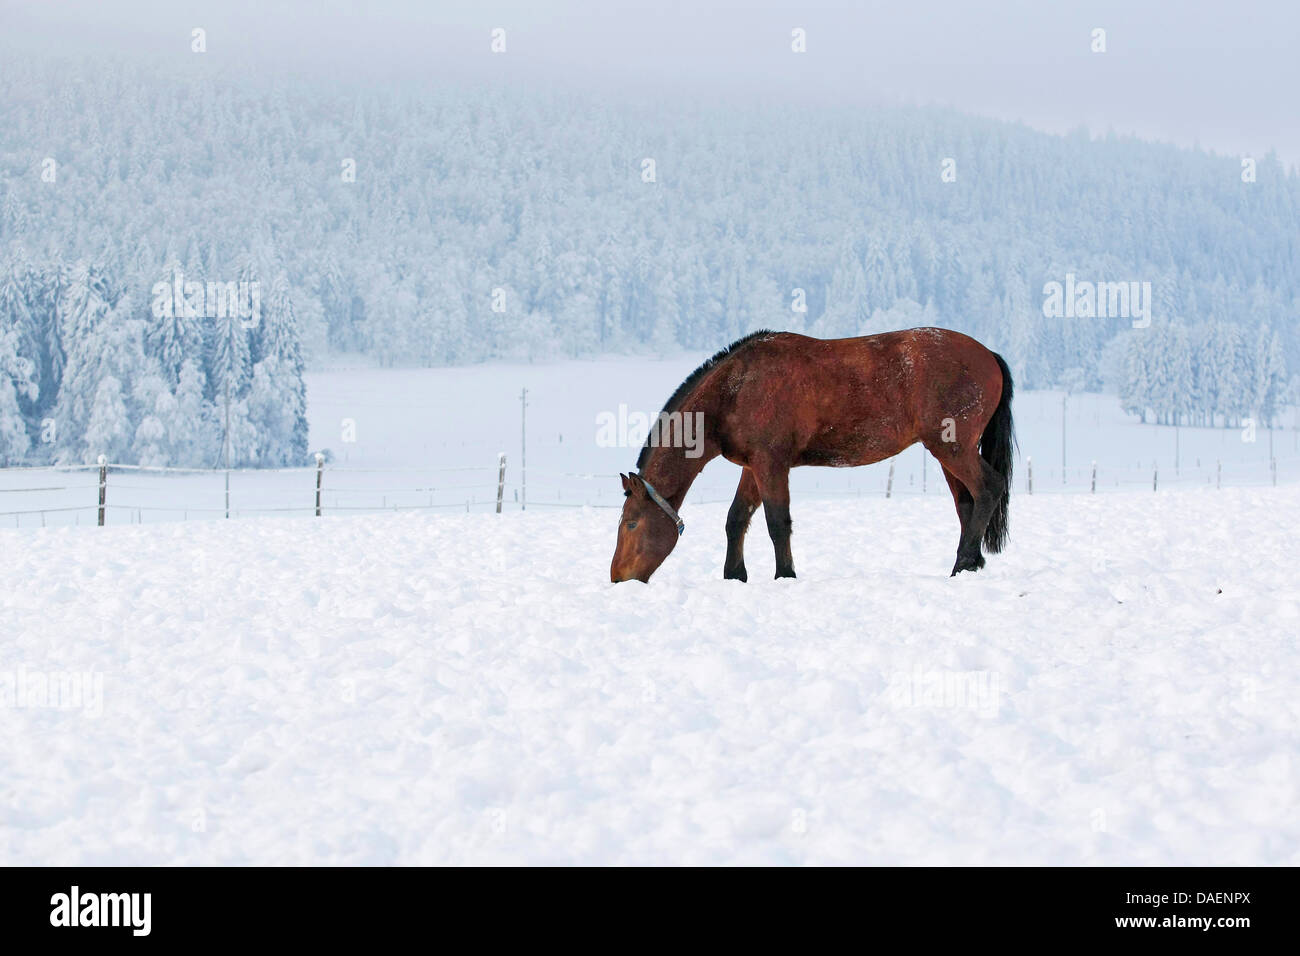 Einsiedler horse, Franches Montagnes (Equus przewalskii f. caballus), brown horse searching for food in the snow, Switzerland Stock Photo